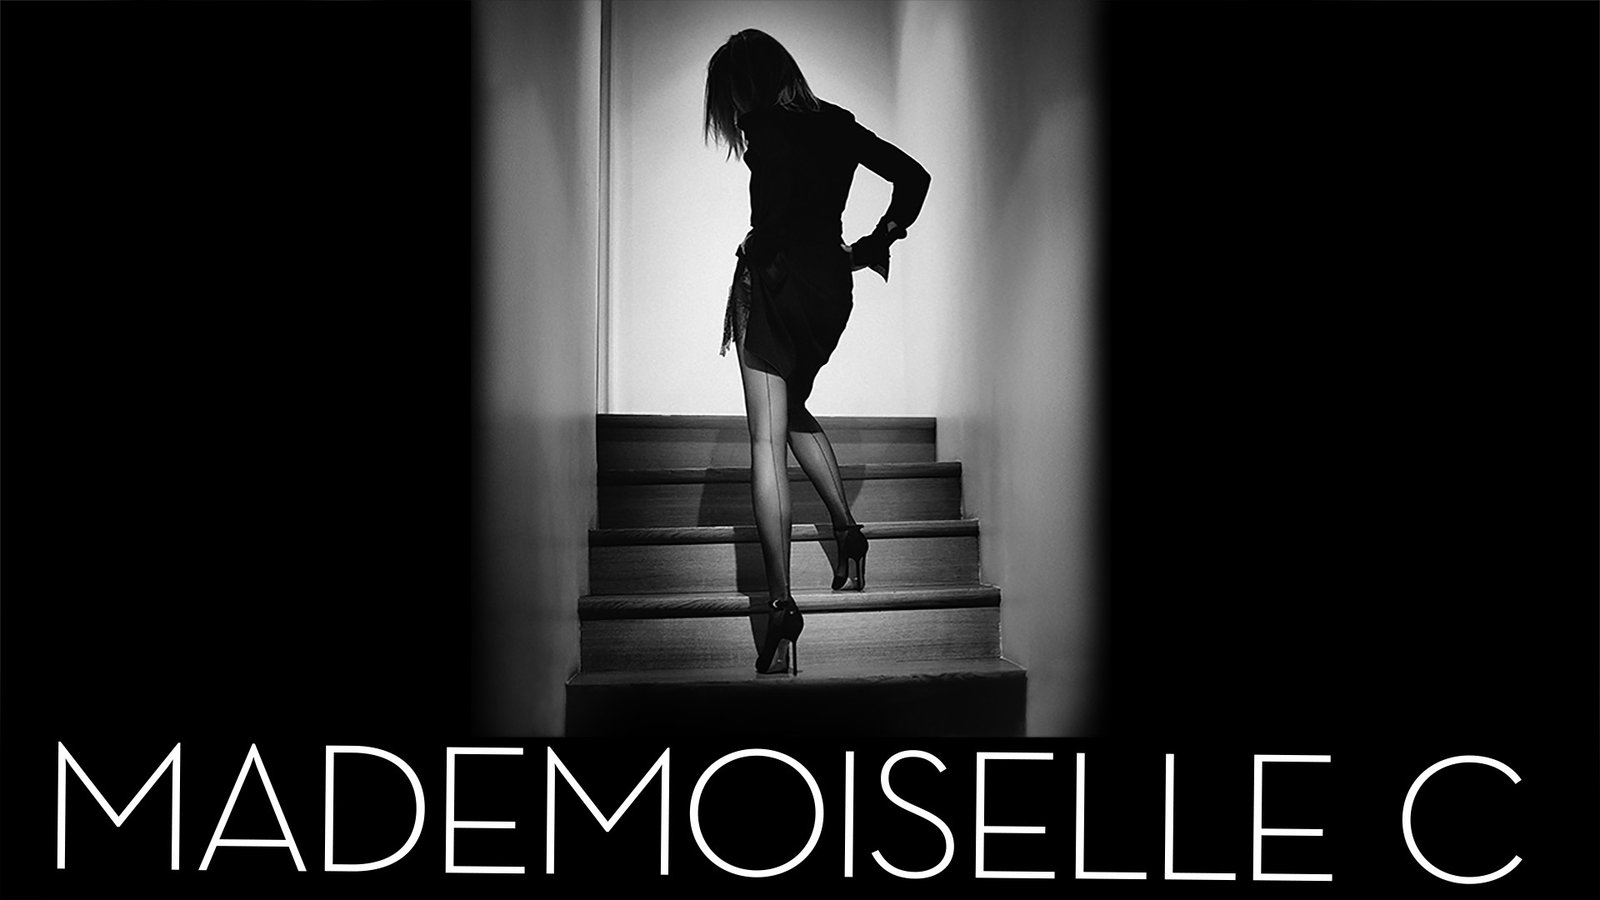 Mademoiselle C - The Life and Work of Fashion Editor Carine Roitfeld